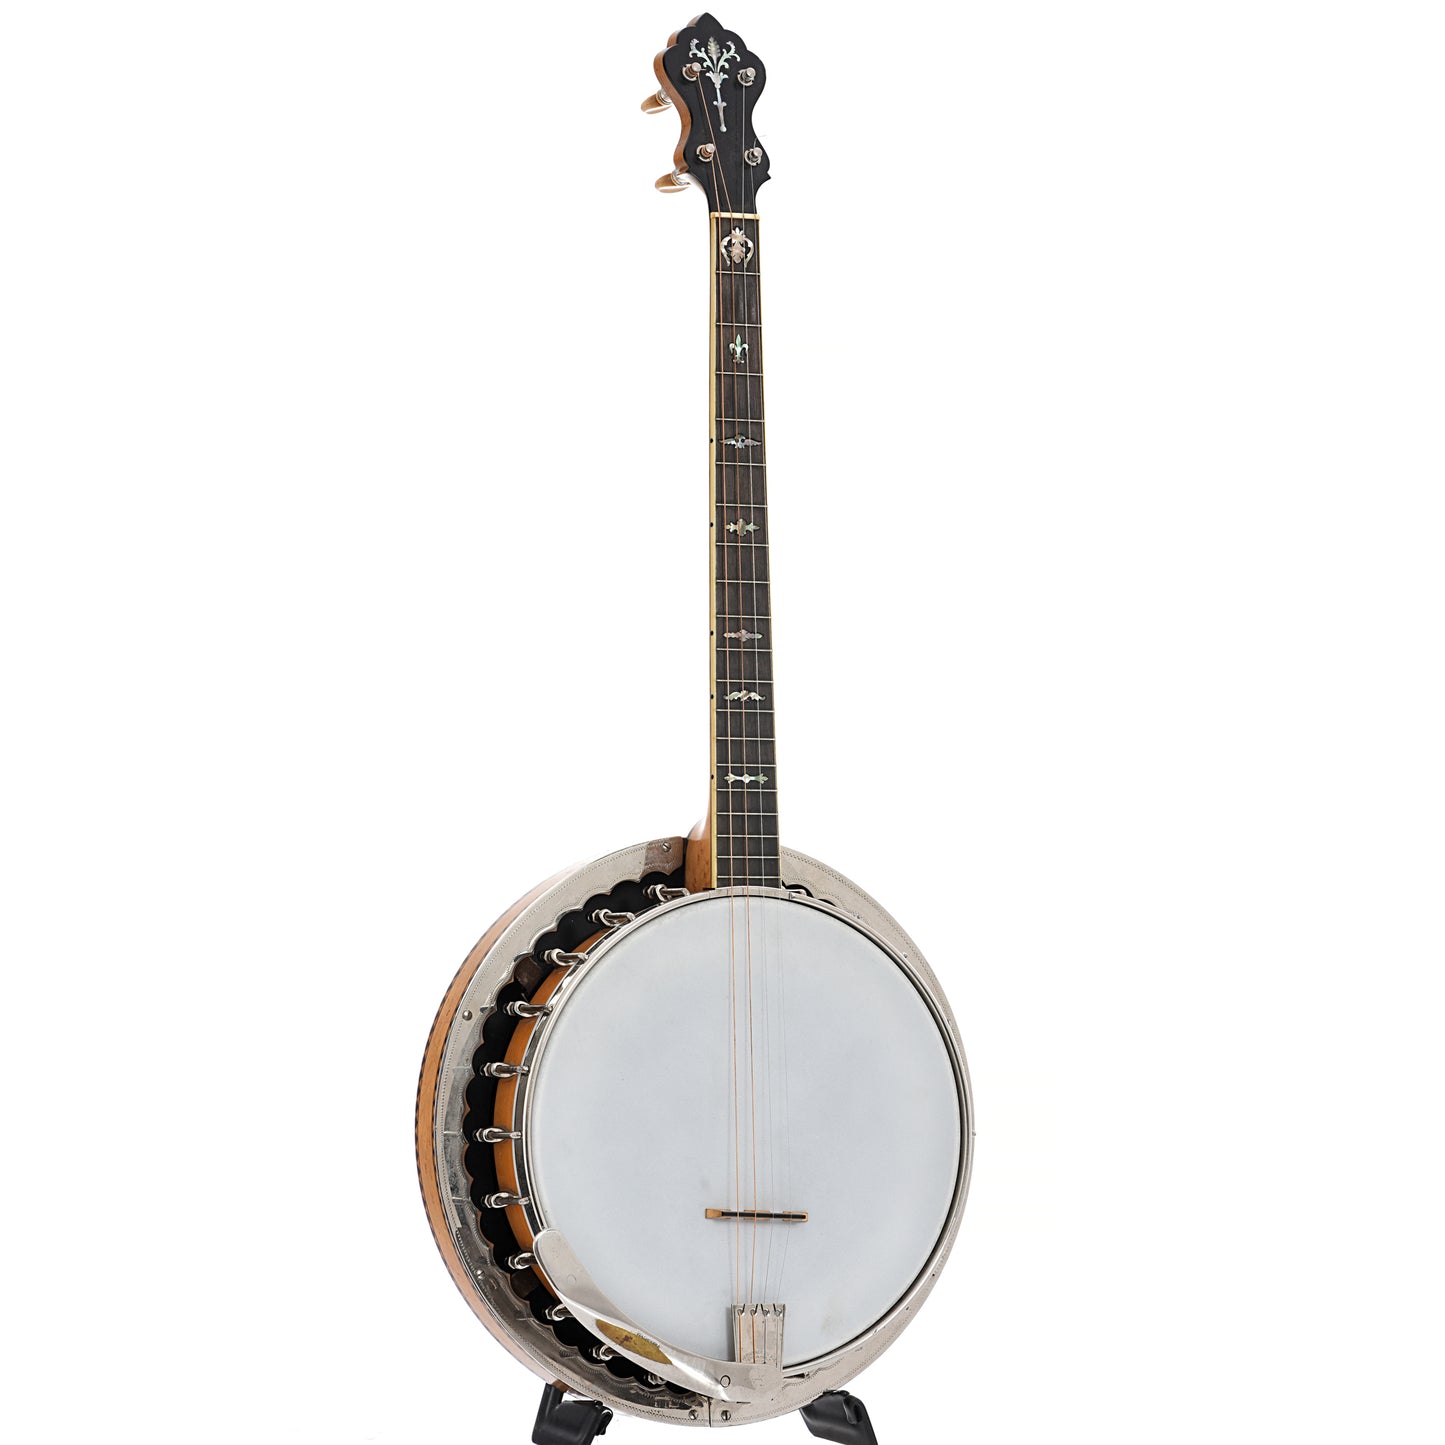 Full front and side of Washburn Style 5179 Classic Tenor Banjo 